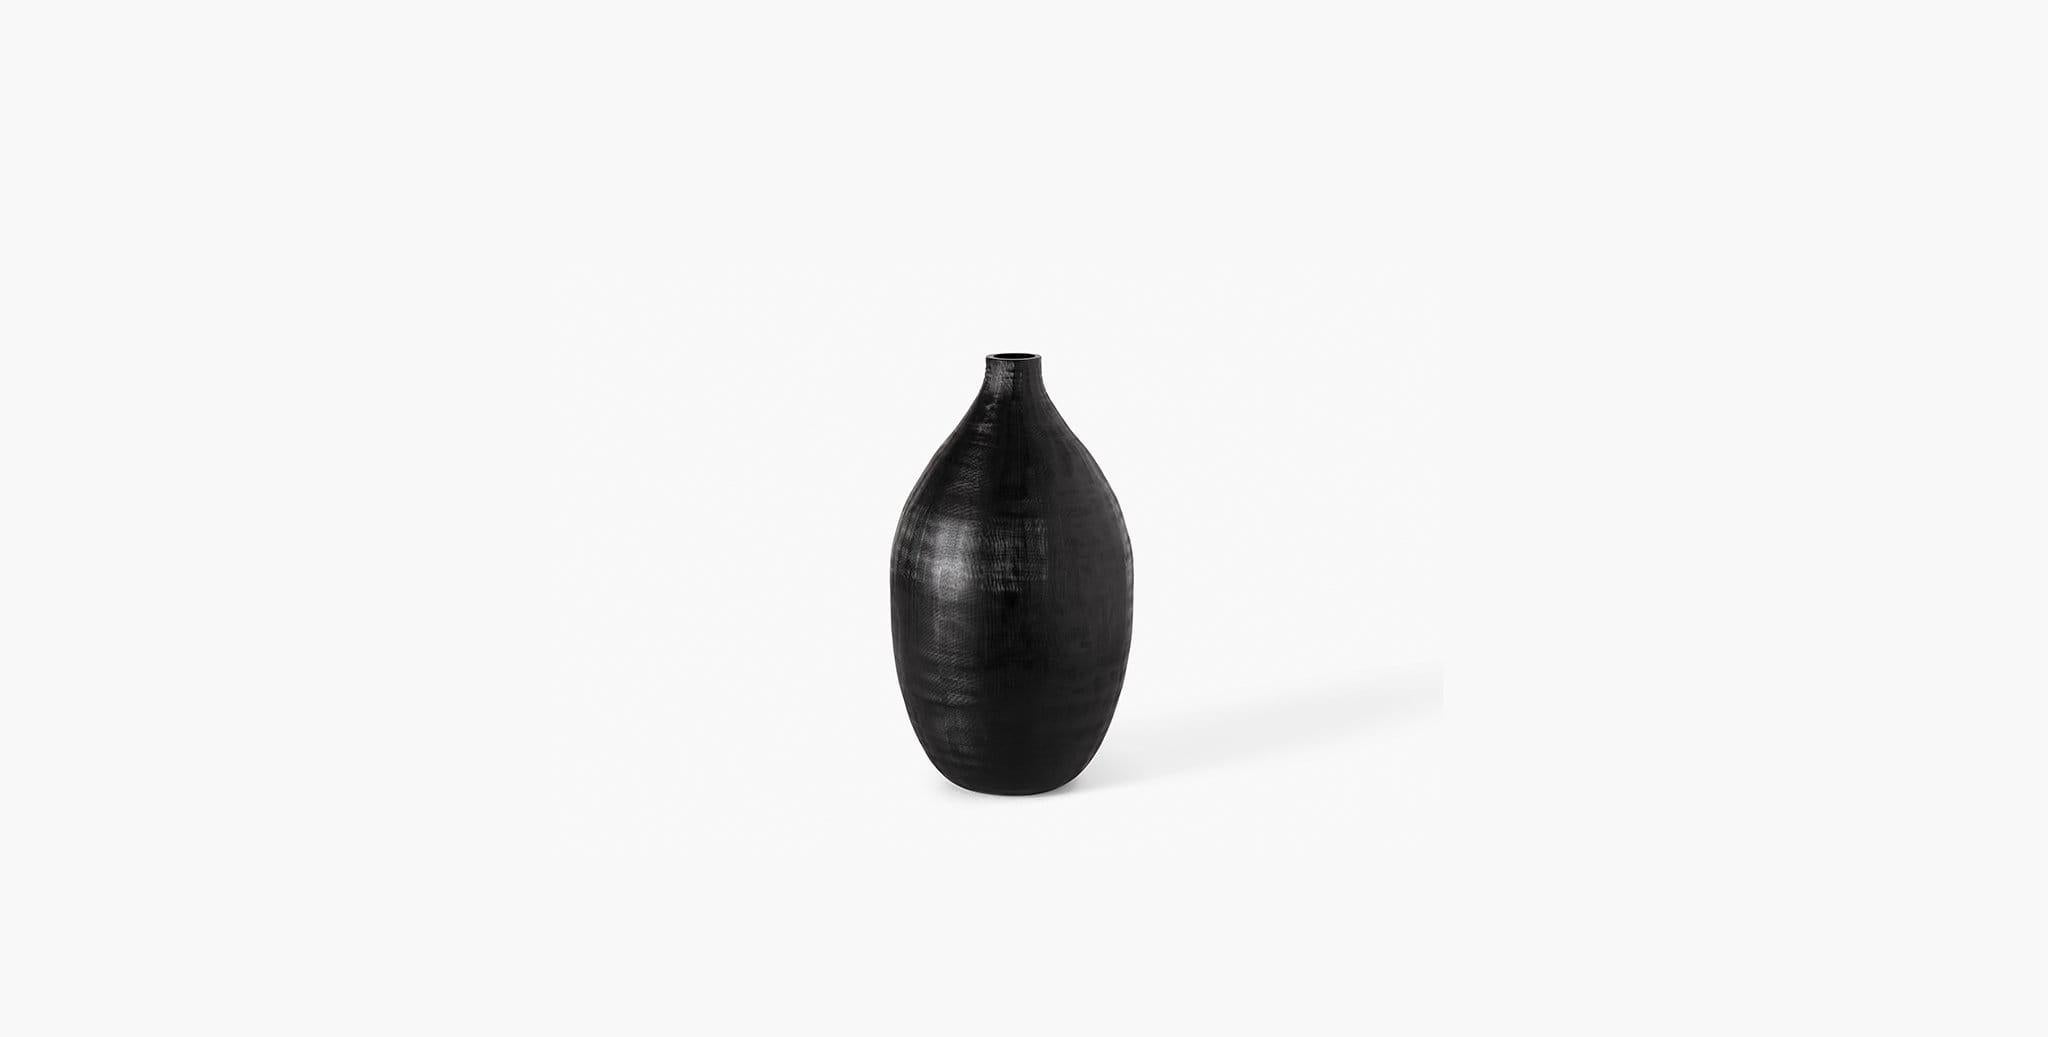 Our Rhea Vessel has a modern semi-opaque glass finish with a subtle crosshatch pattern that creates textural interest to your home design. Our handcrafted fabrics, leathers, and finishes are inspired by the natural variations within fibers,